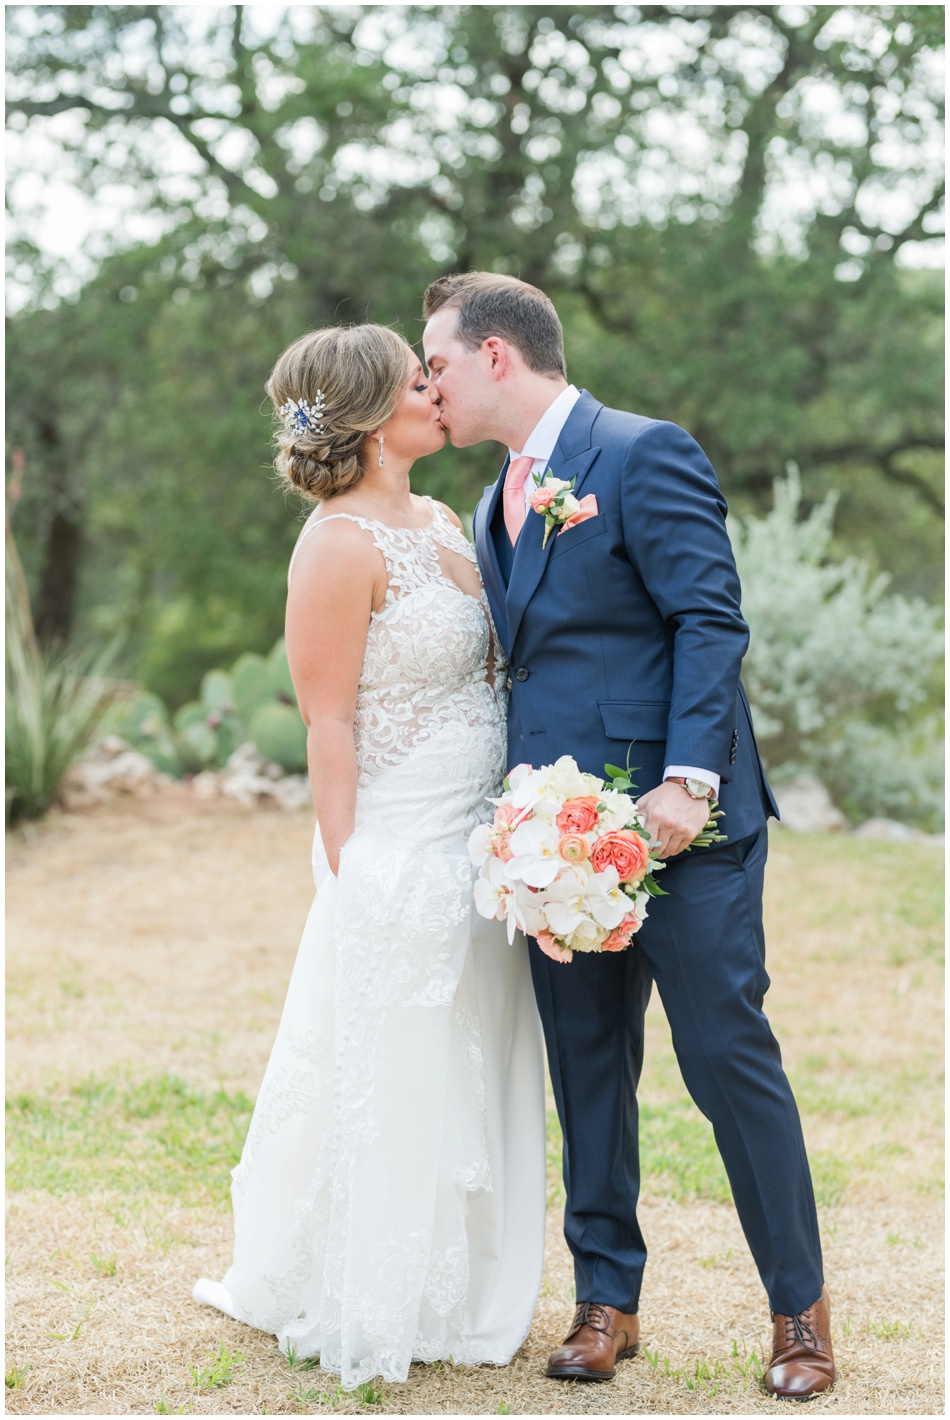 Preferred Wedding Photographer for The Milestone in Georgetown Texas